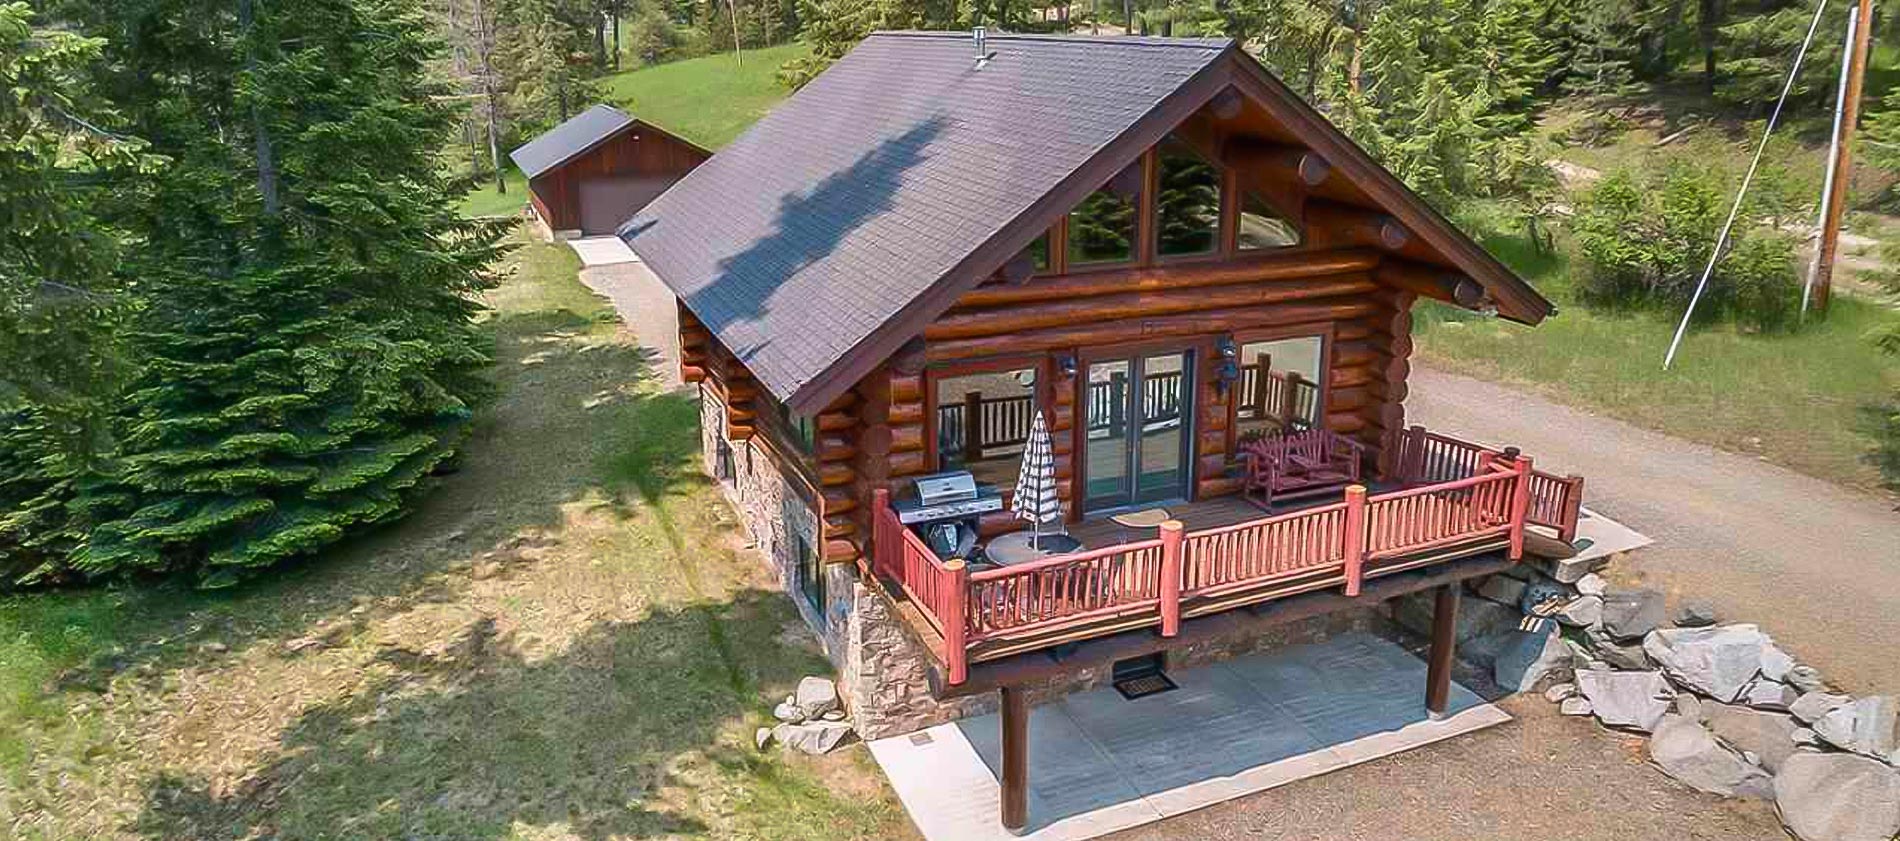 Beautiful custom log home with dry stack native rock, resting by a cedar adorned stream